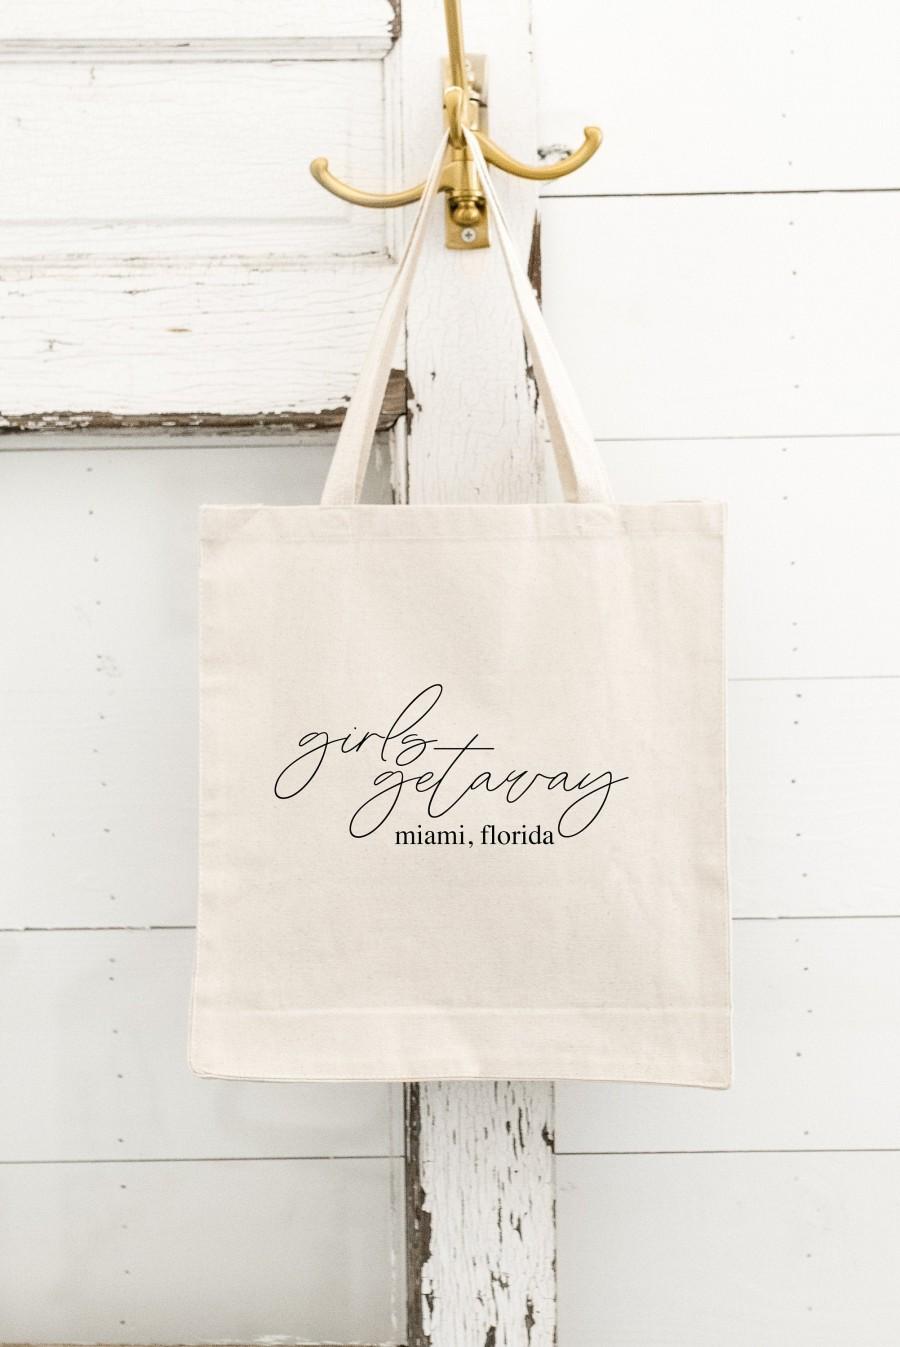 Mariage - Girls Getaway Tote with Location - Girls Wknd - Weekend Tote - Girls Getaway - Girls Trip - Gift - Tote Bag - Weekend Trip - Girls Weekend